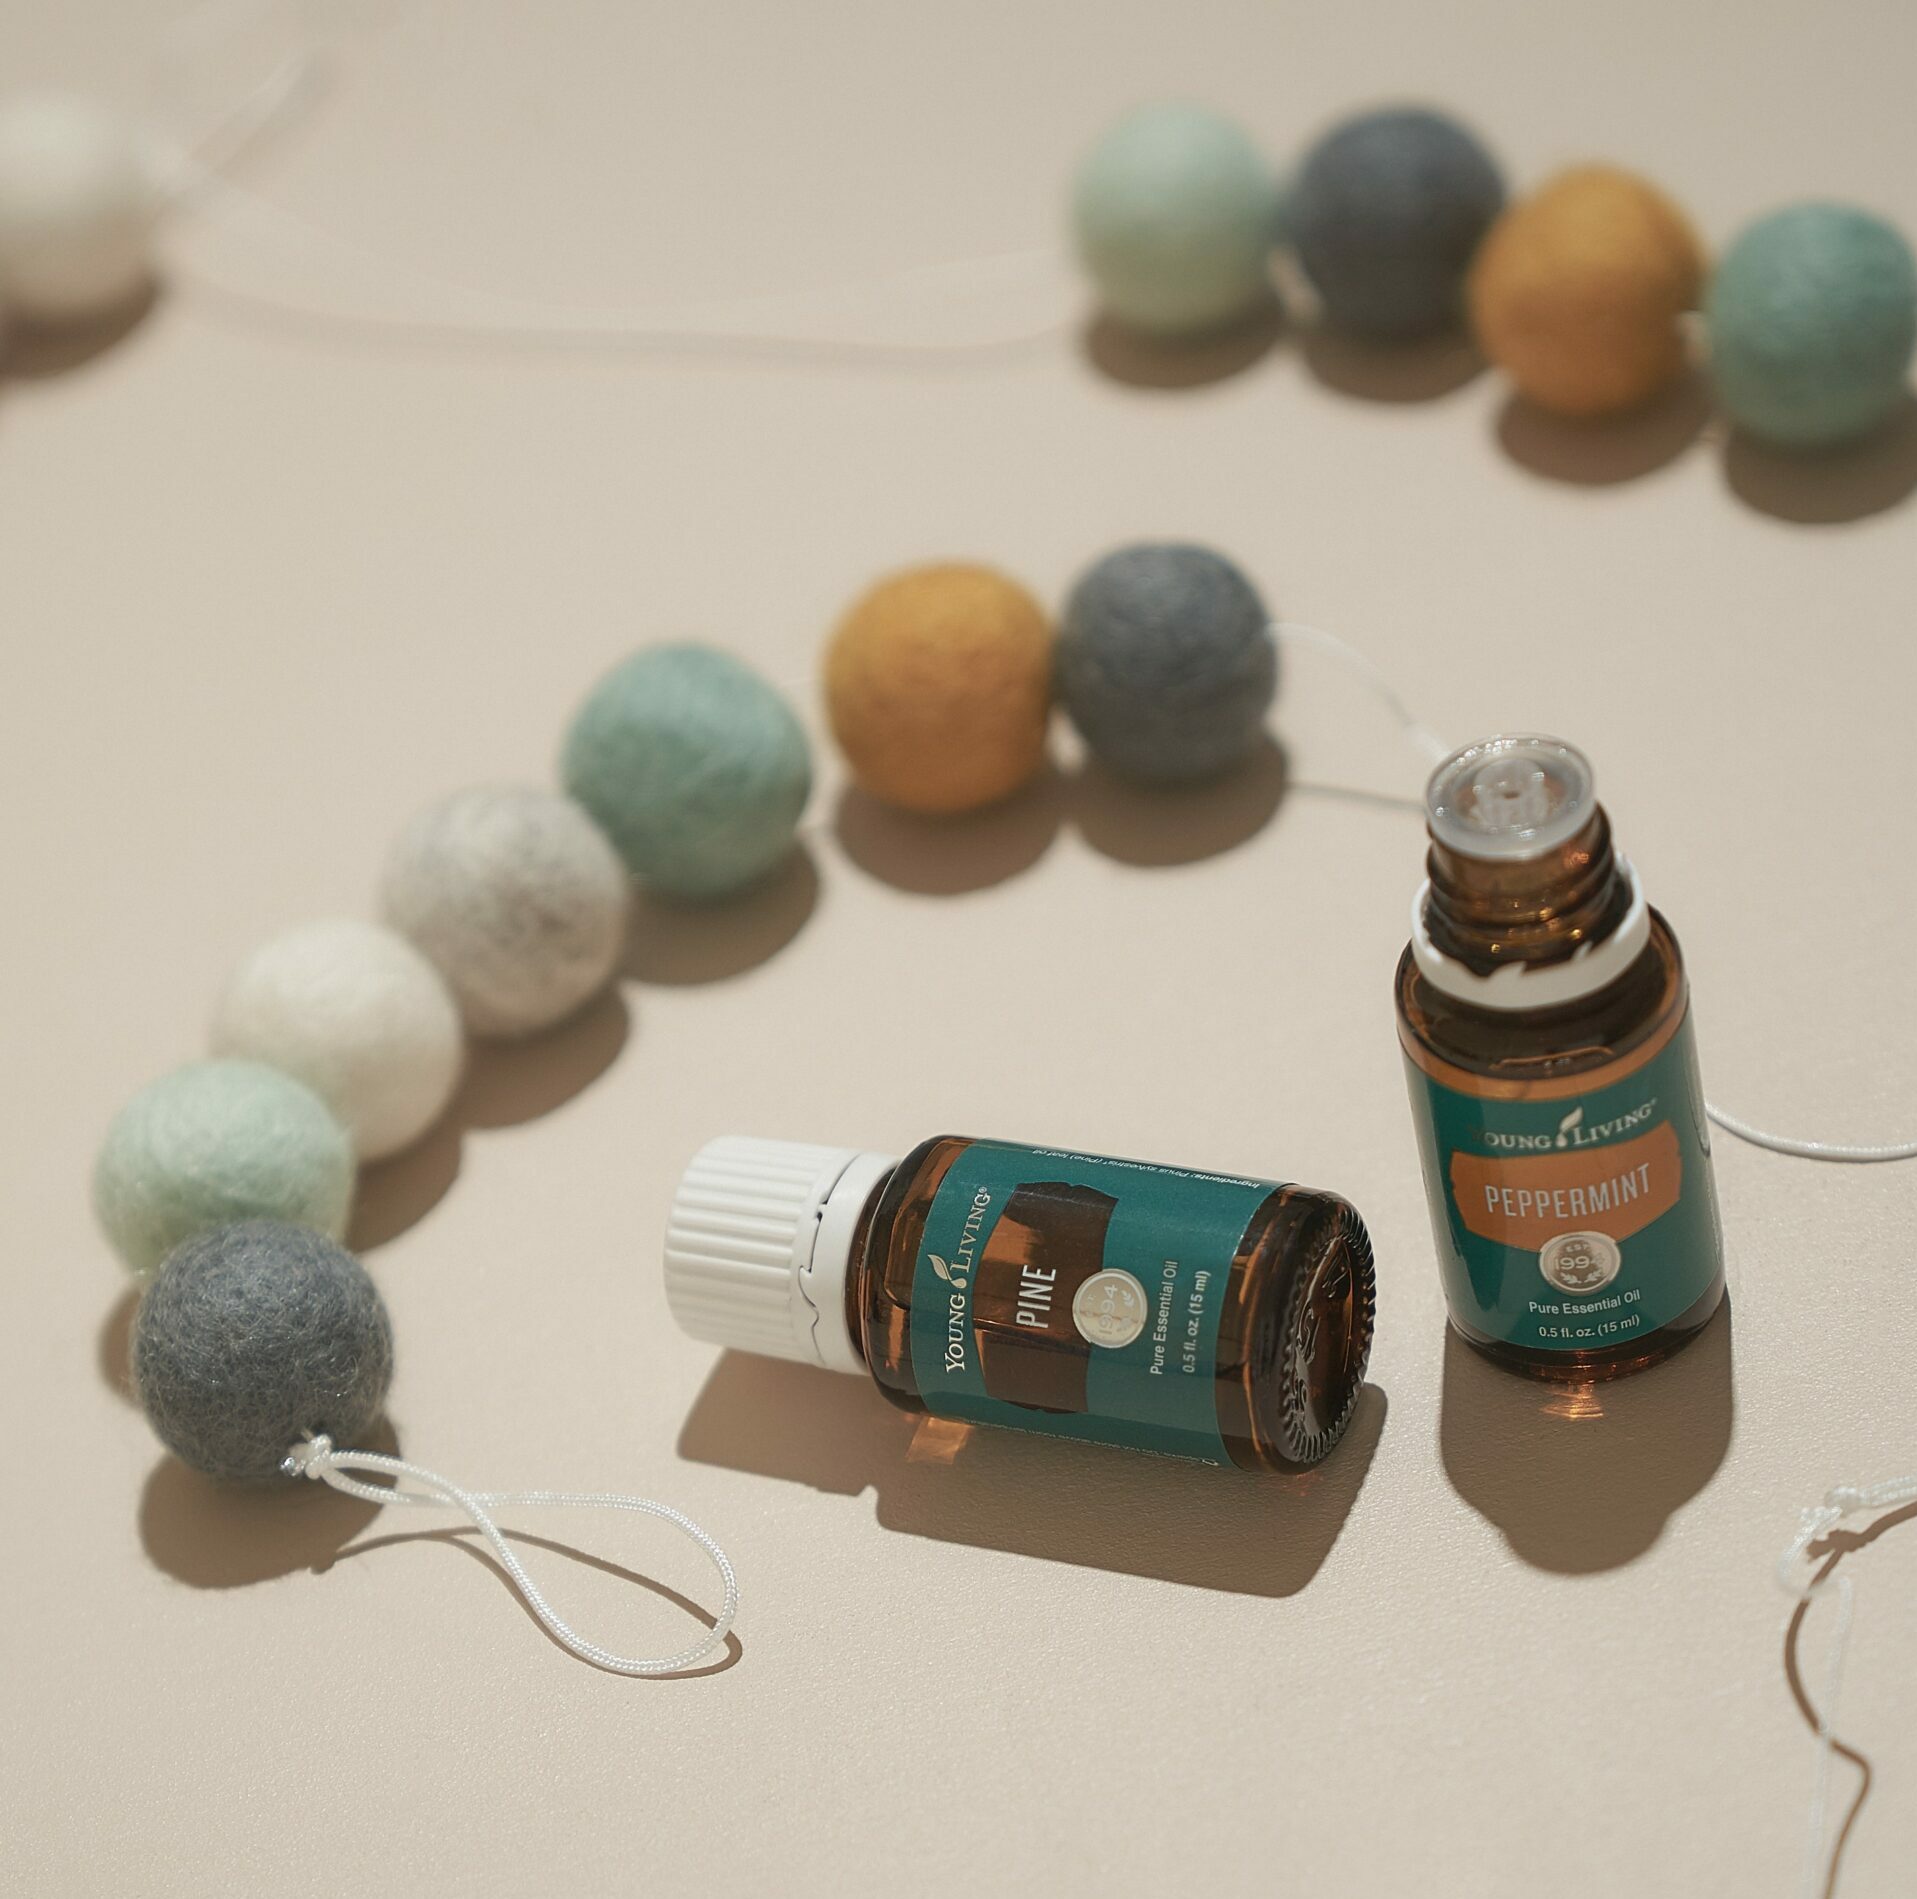 DIY garland with Peppermint & Pine Essential Oils - Young Living Lavender Life Blog 